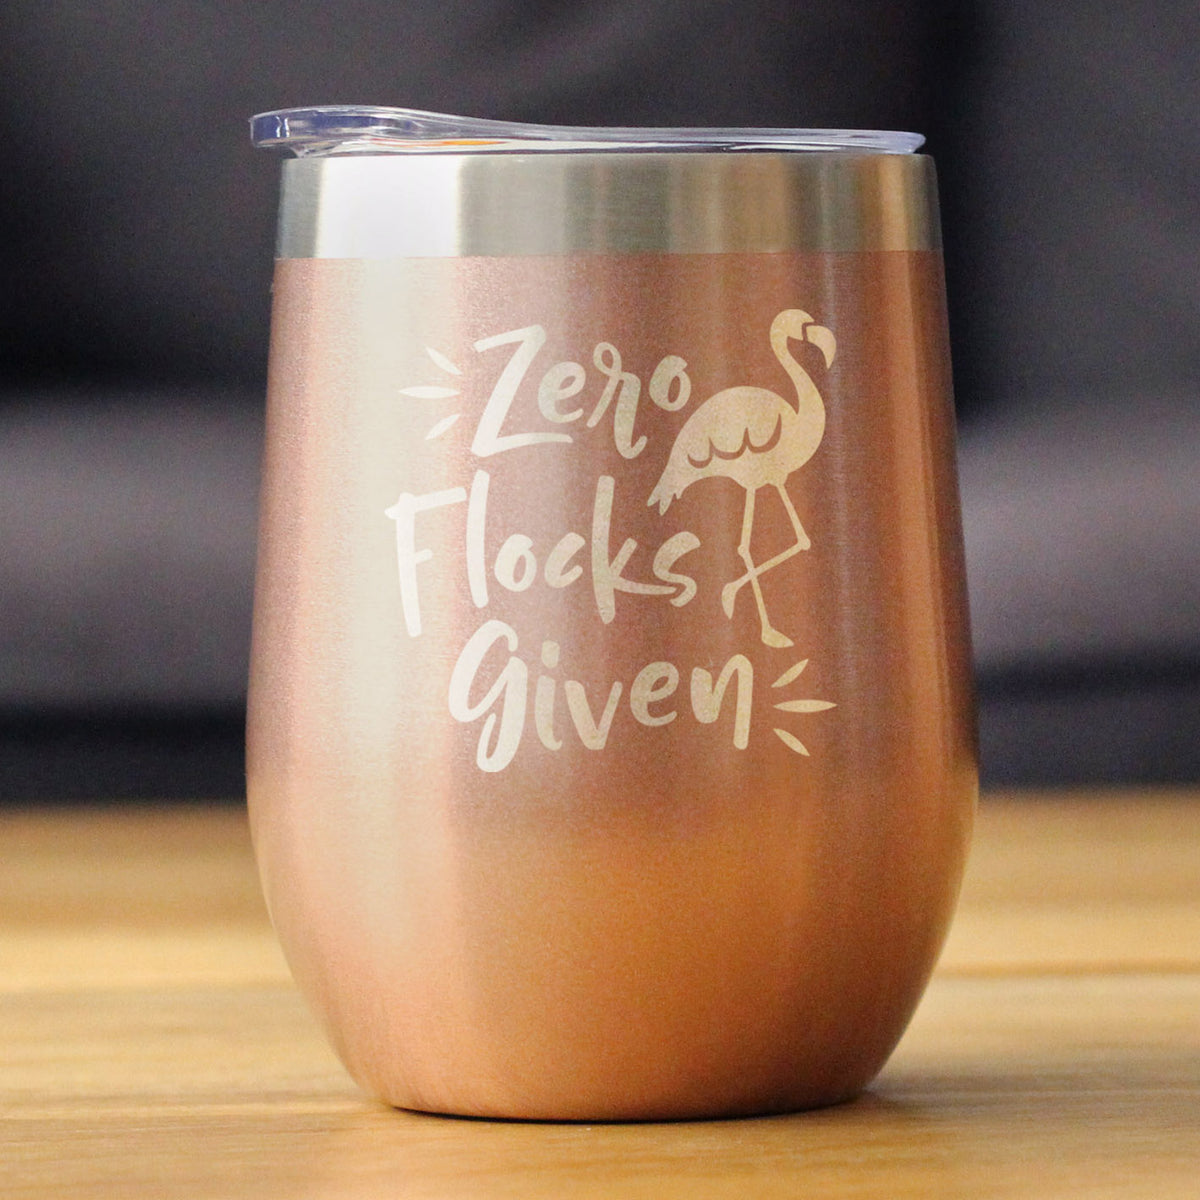 Zero Flocks Given - Flamingo Wine Tumbler with Sliding Lid - Stemless Stainless Steel Insulated Cup - Cute Funny Outdoor Camping Gift